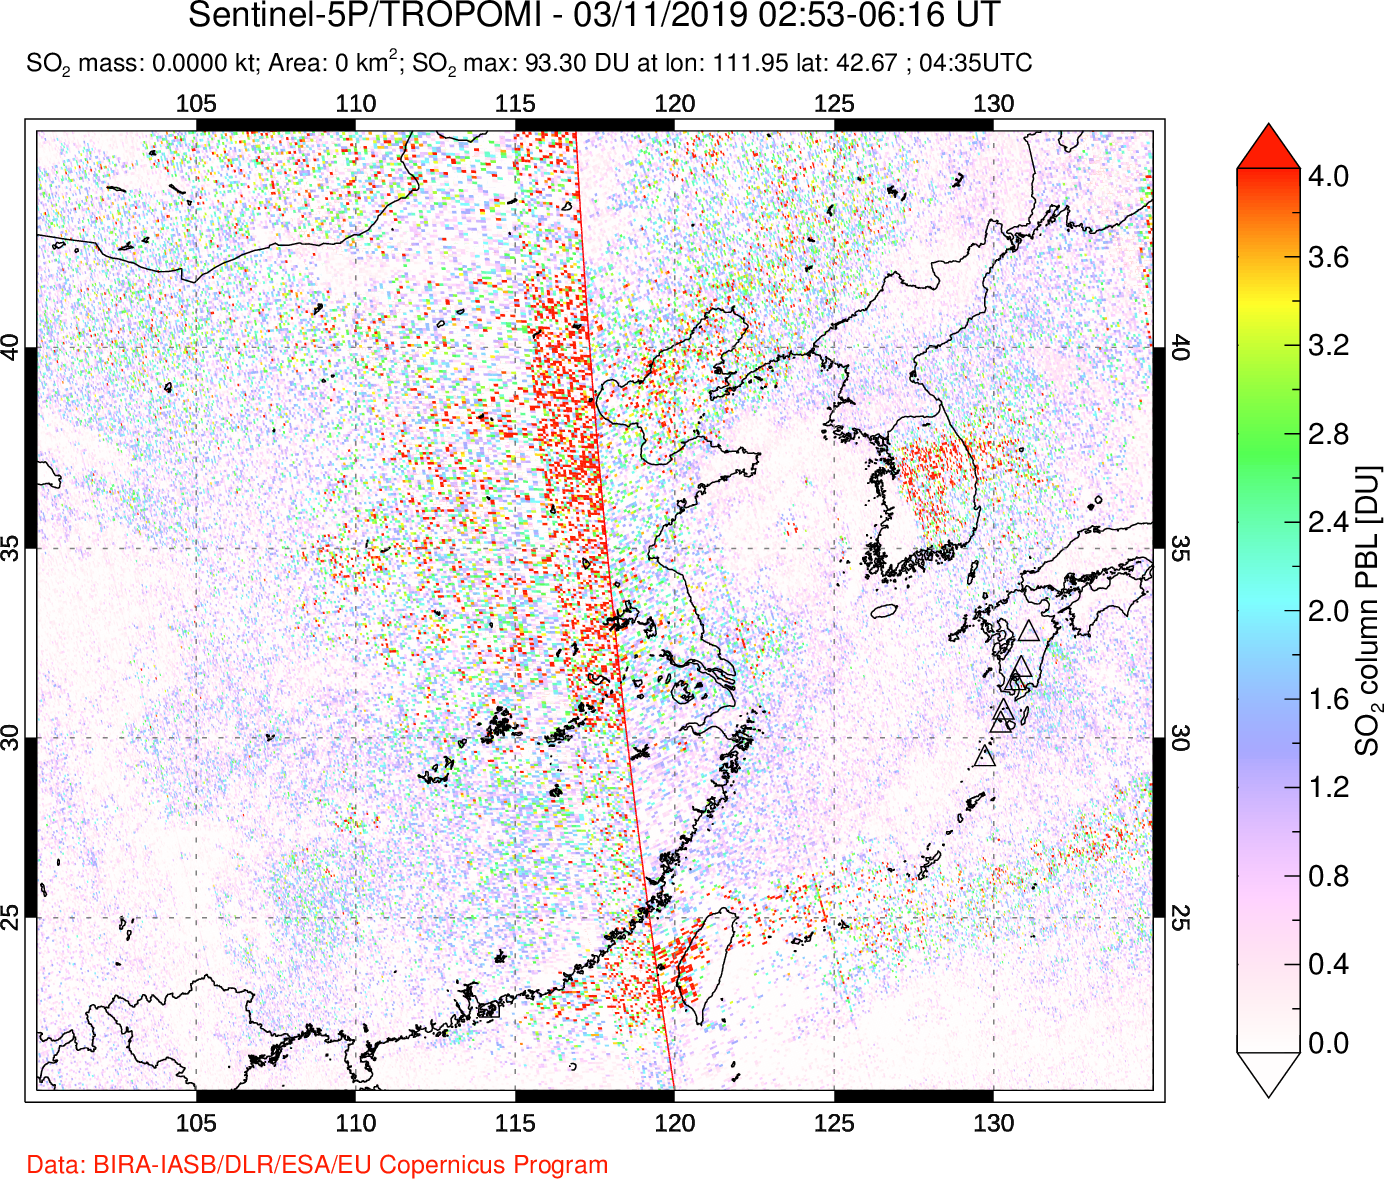 A sulfur dioxide image over Eastern China on Mar 11, 2019.